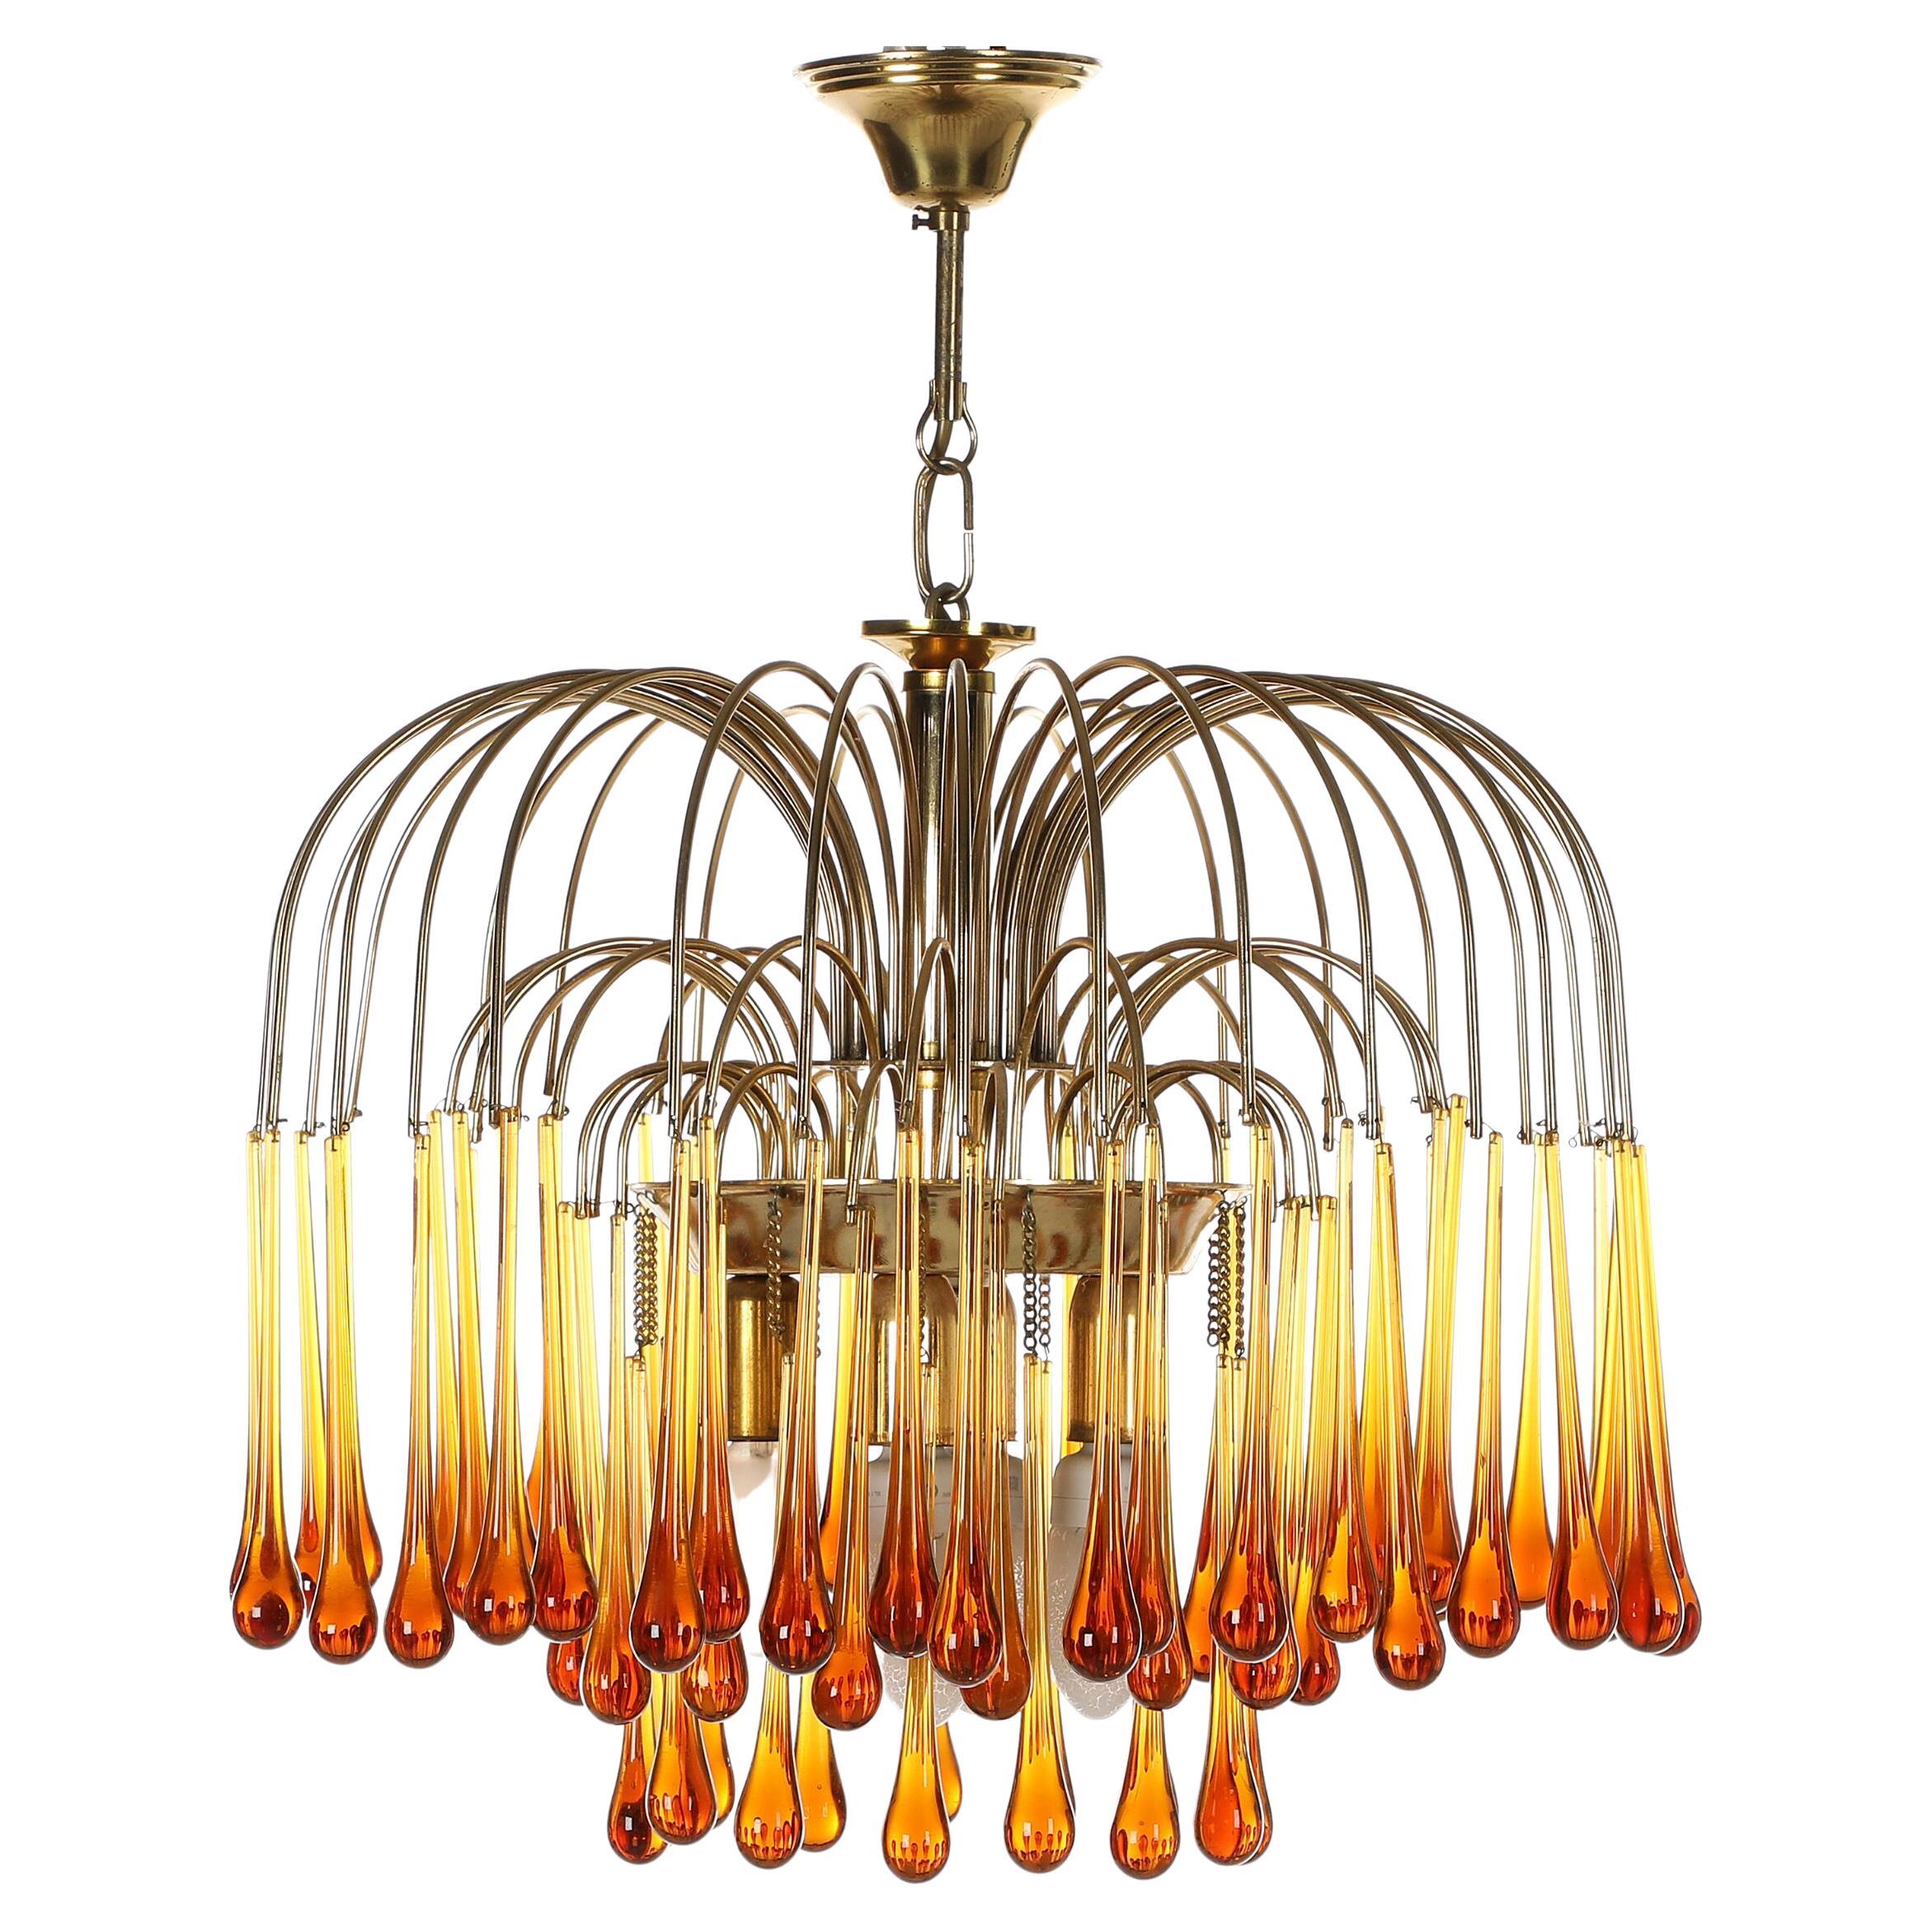 Brass Chandelier, Hung with Drop-Shaped Prisms of Amber Glass For Sale